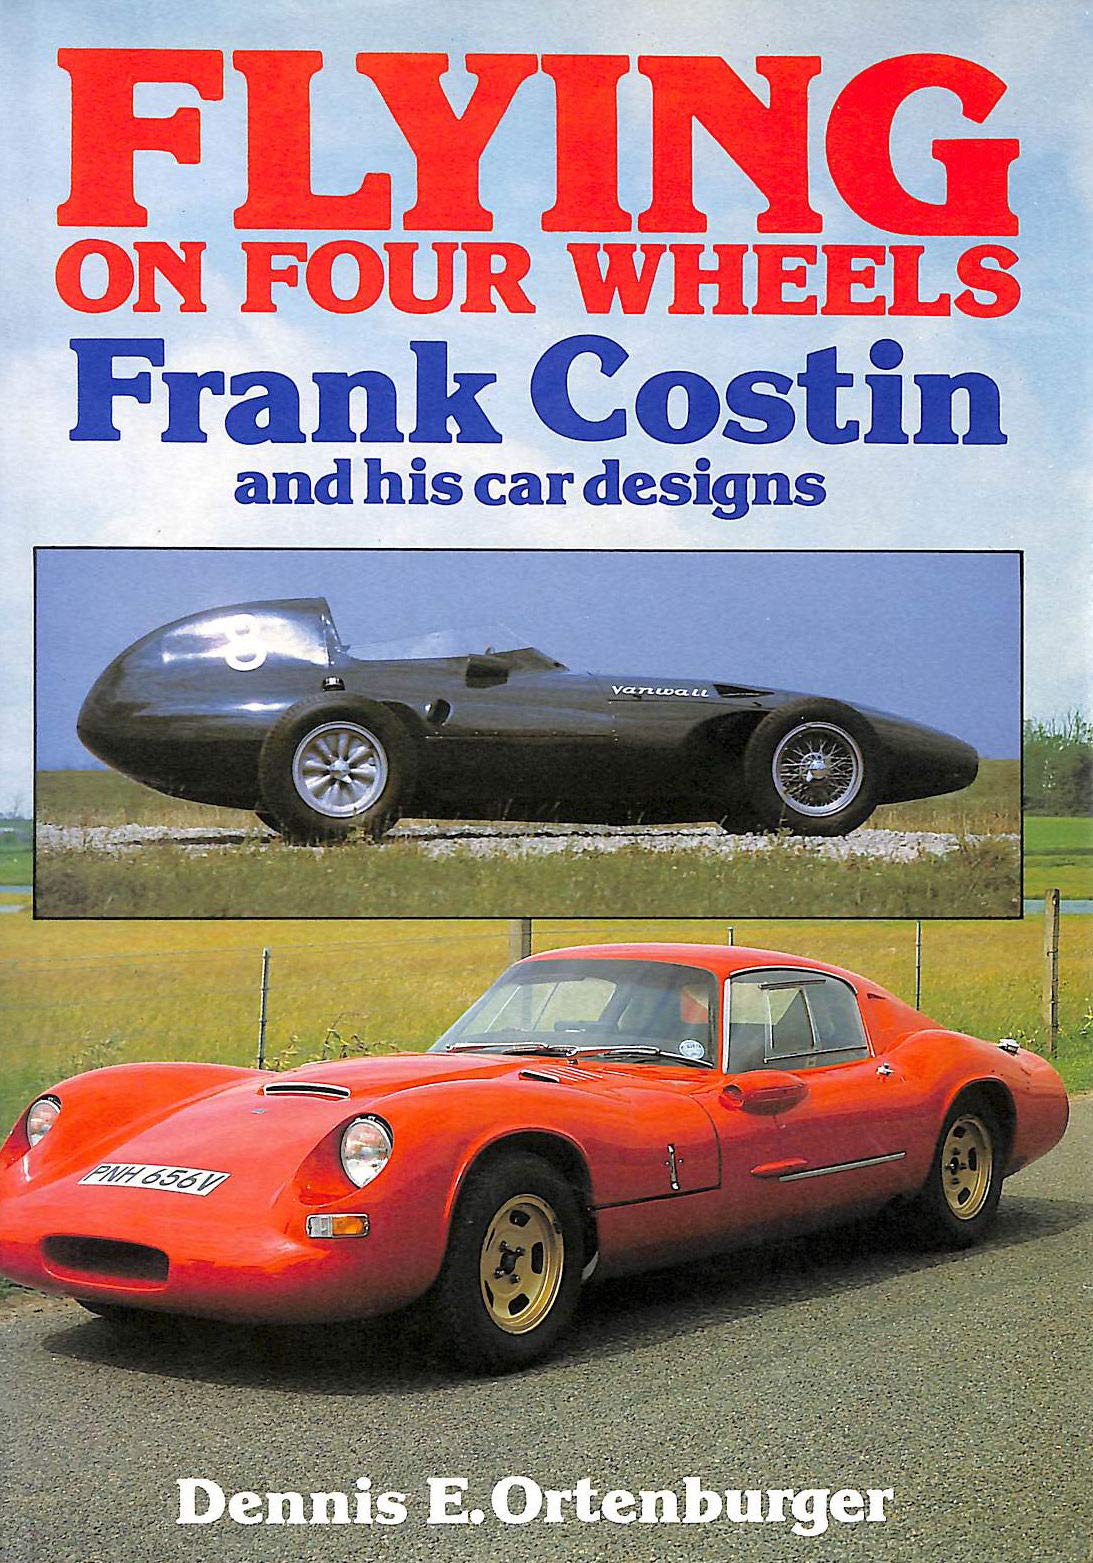 FLYING ON FOUR WHEELS - FRANK COSTIN AND HIS CAR DESIGNS